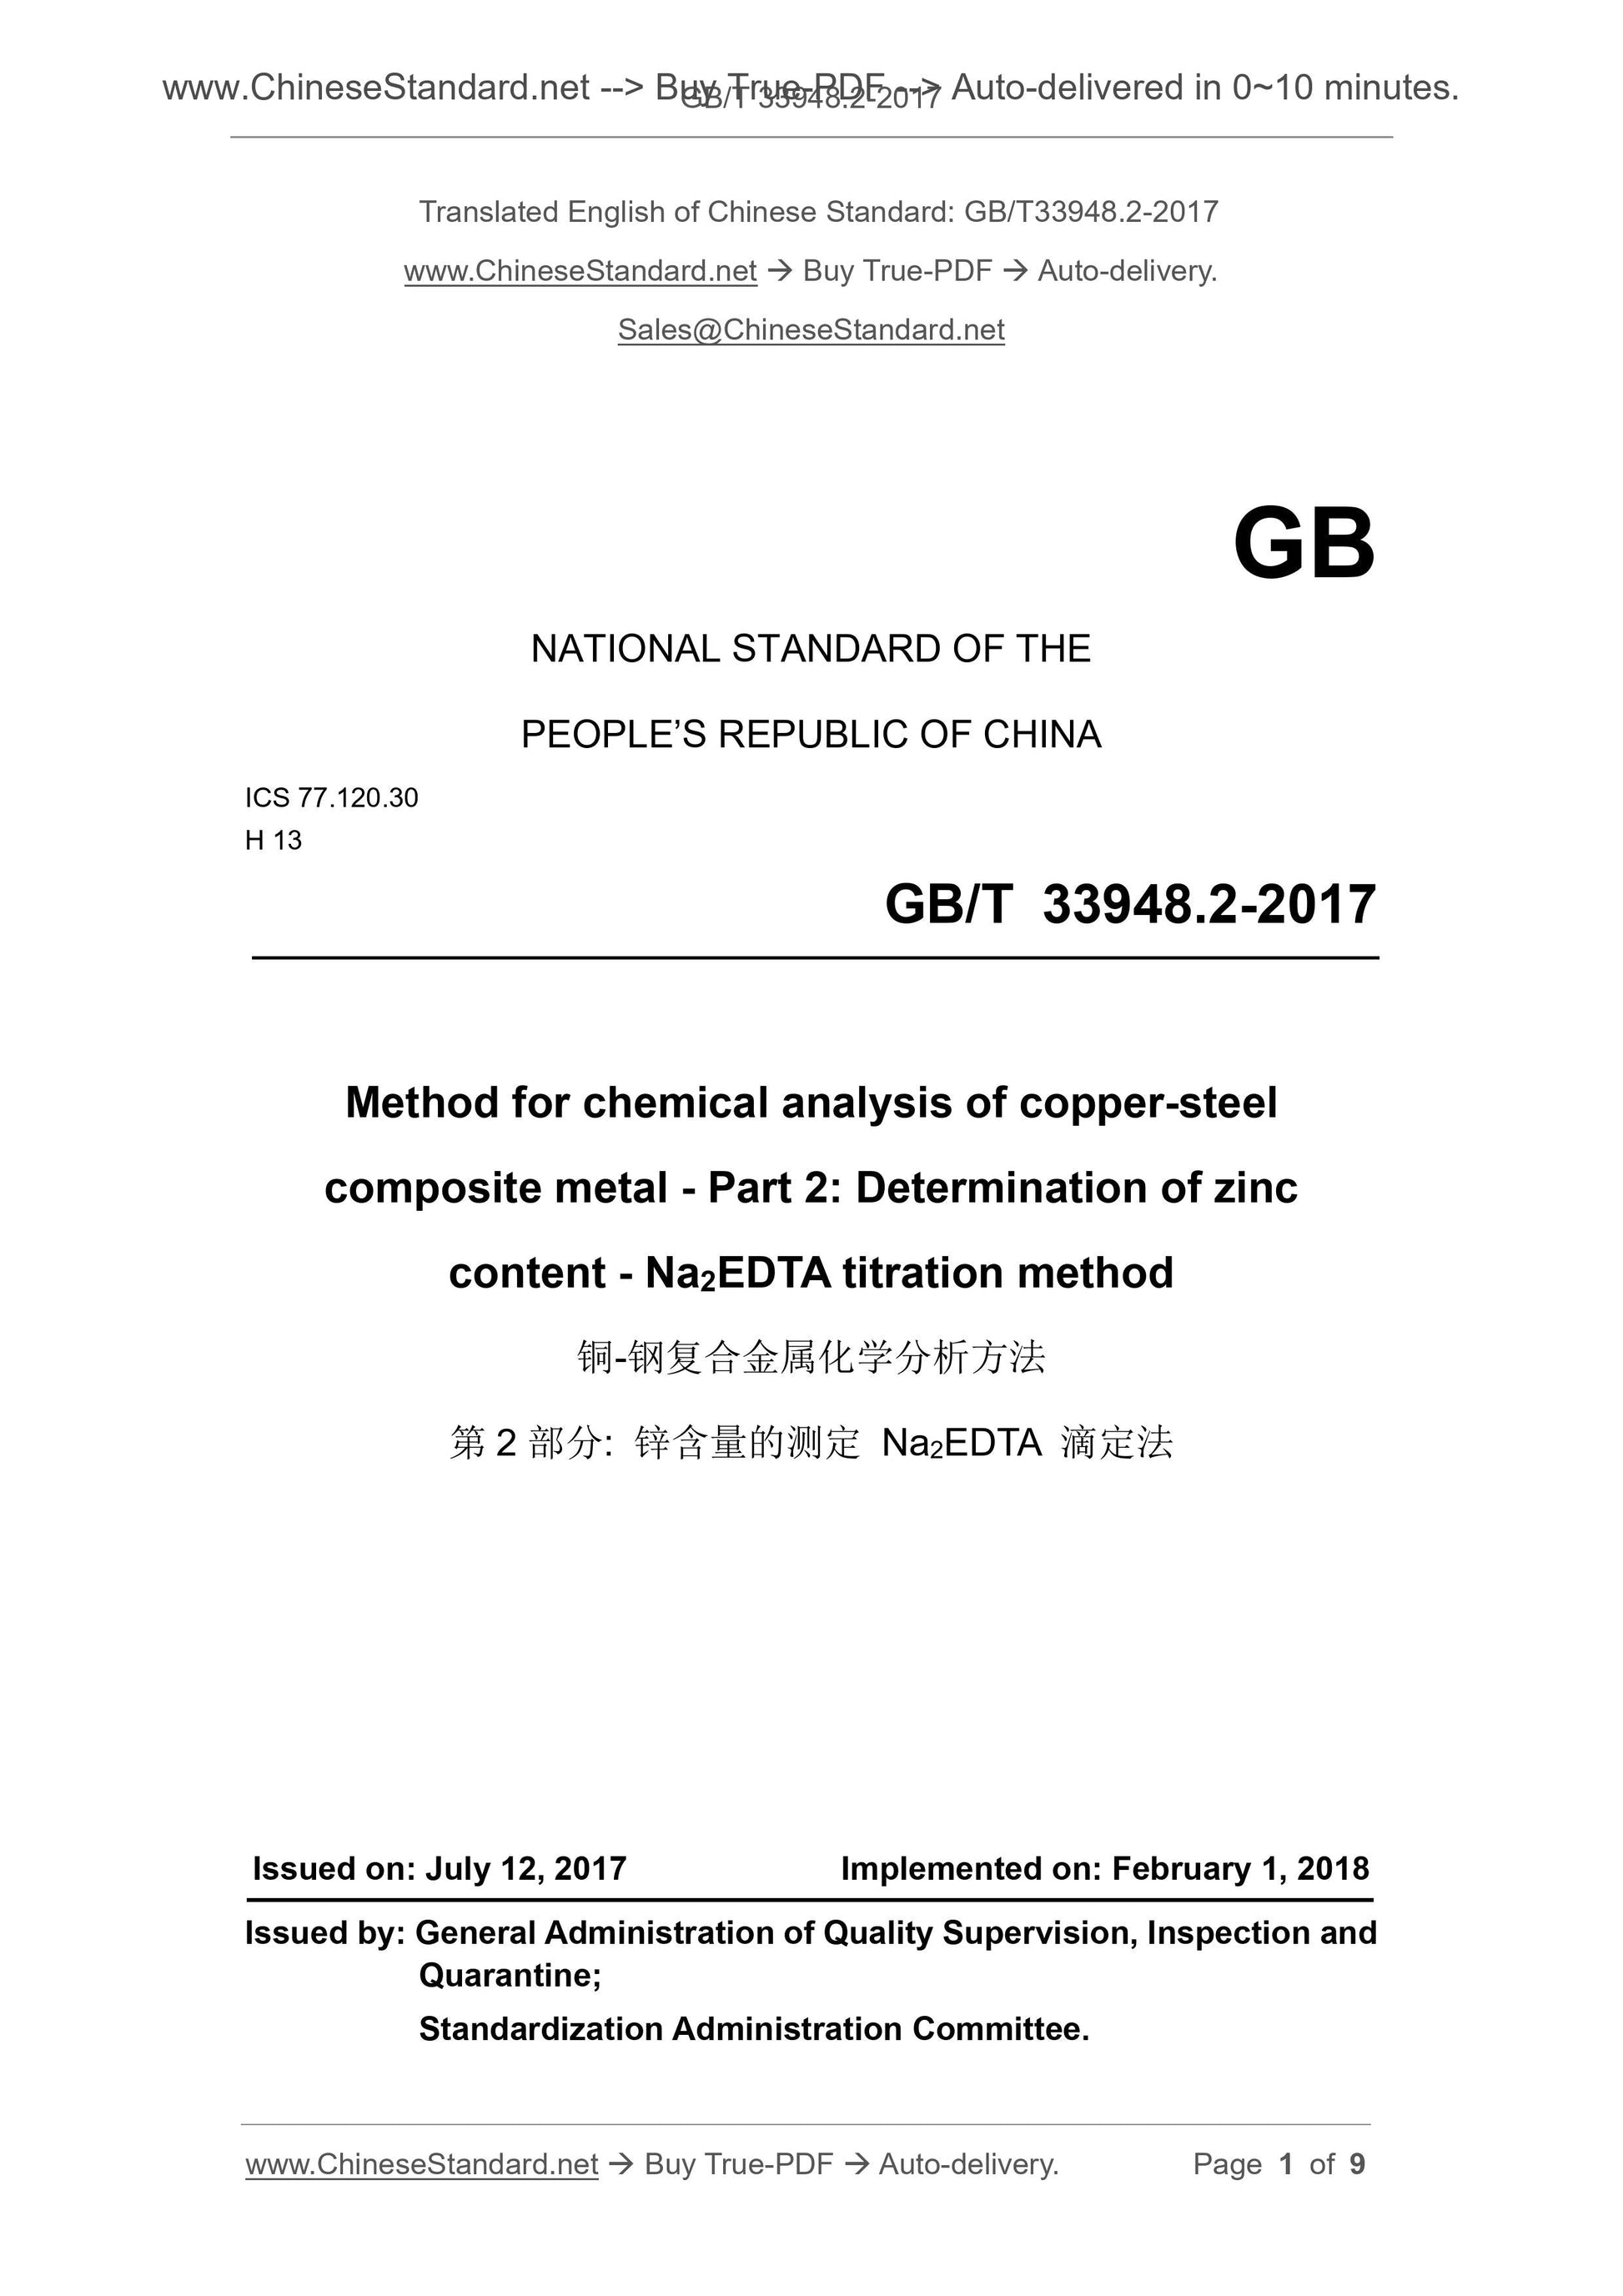 GB/T 33948.2-2017 Page 1